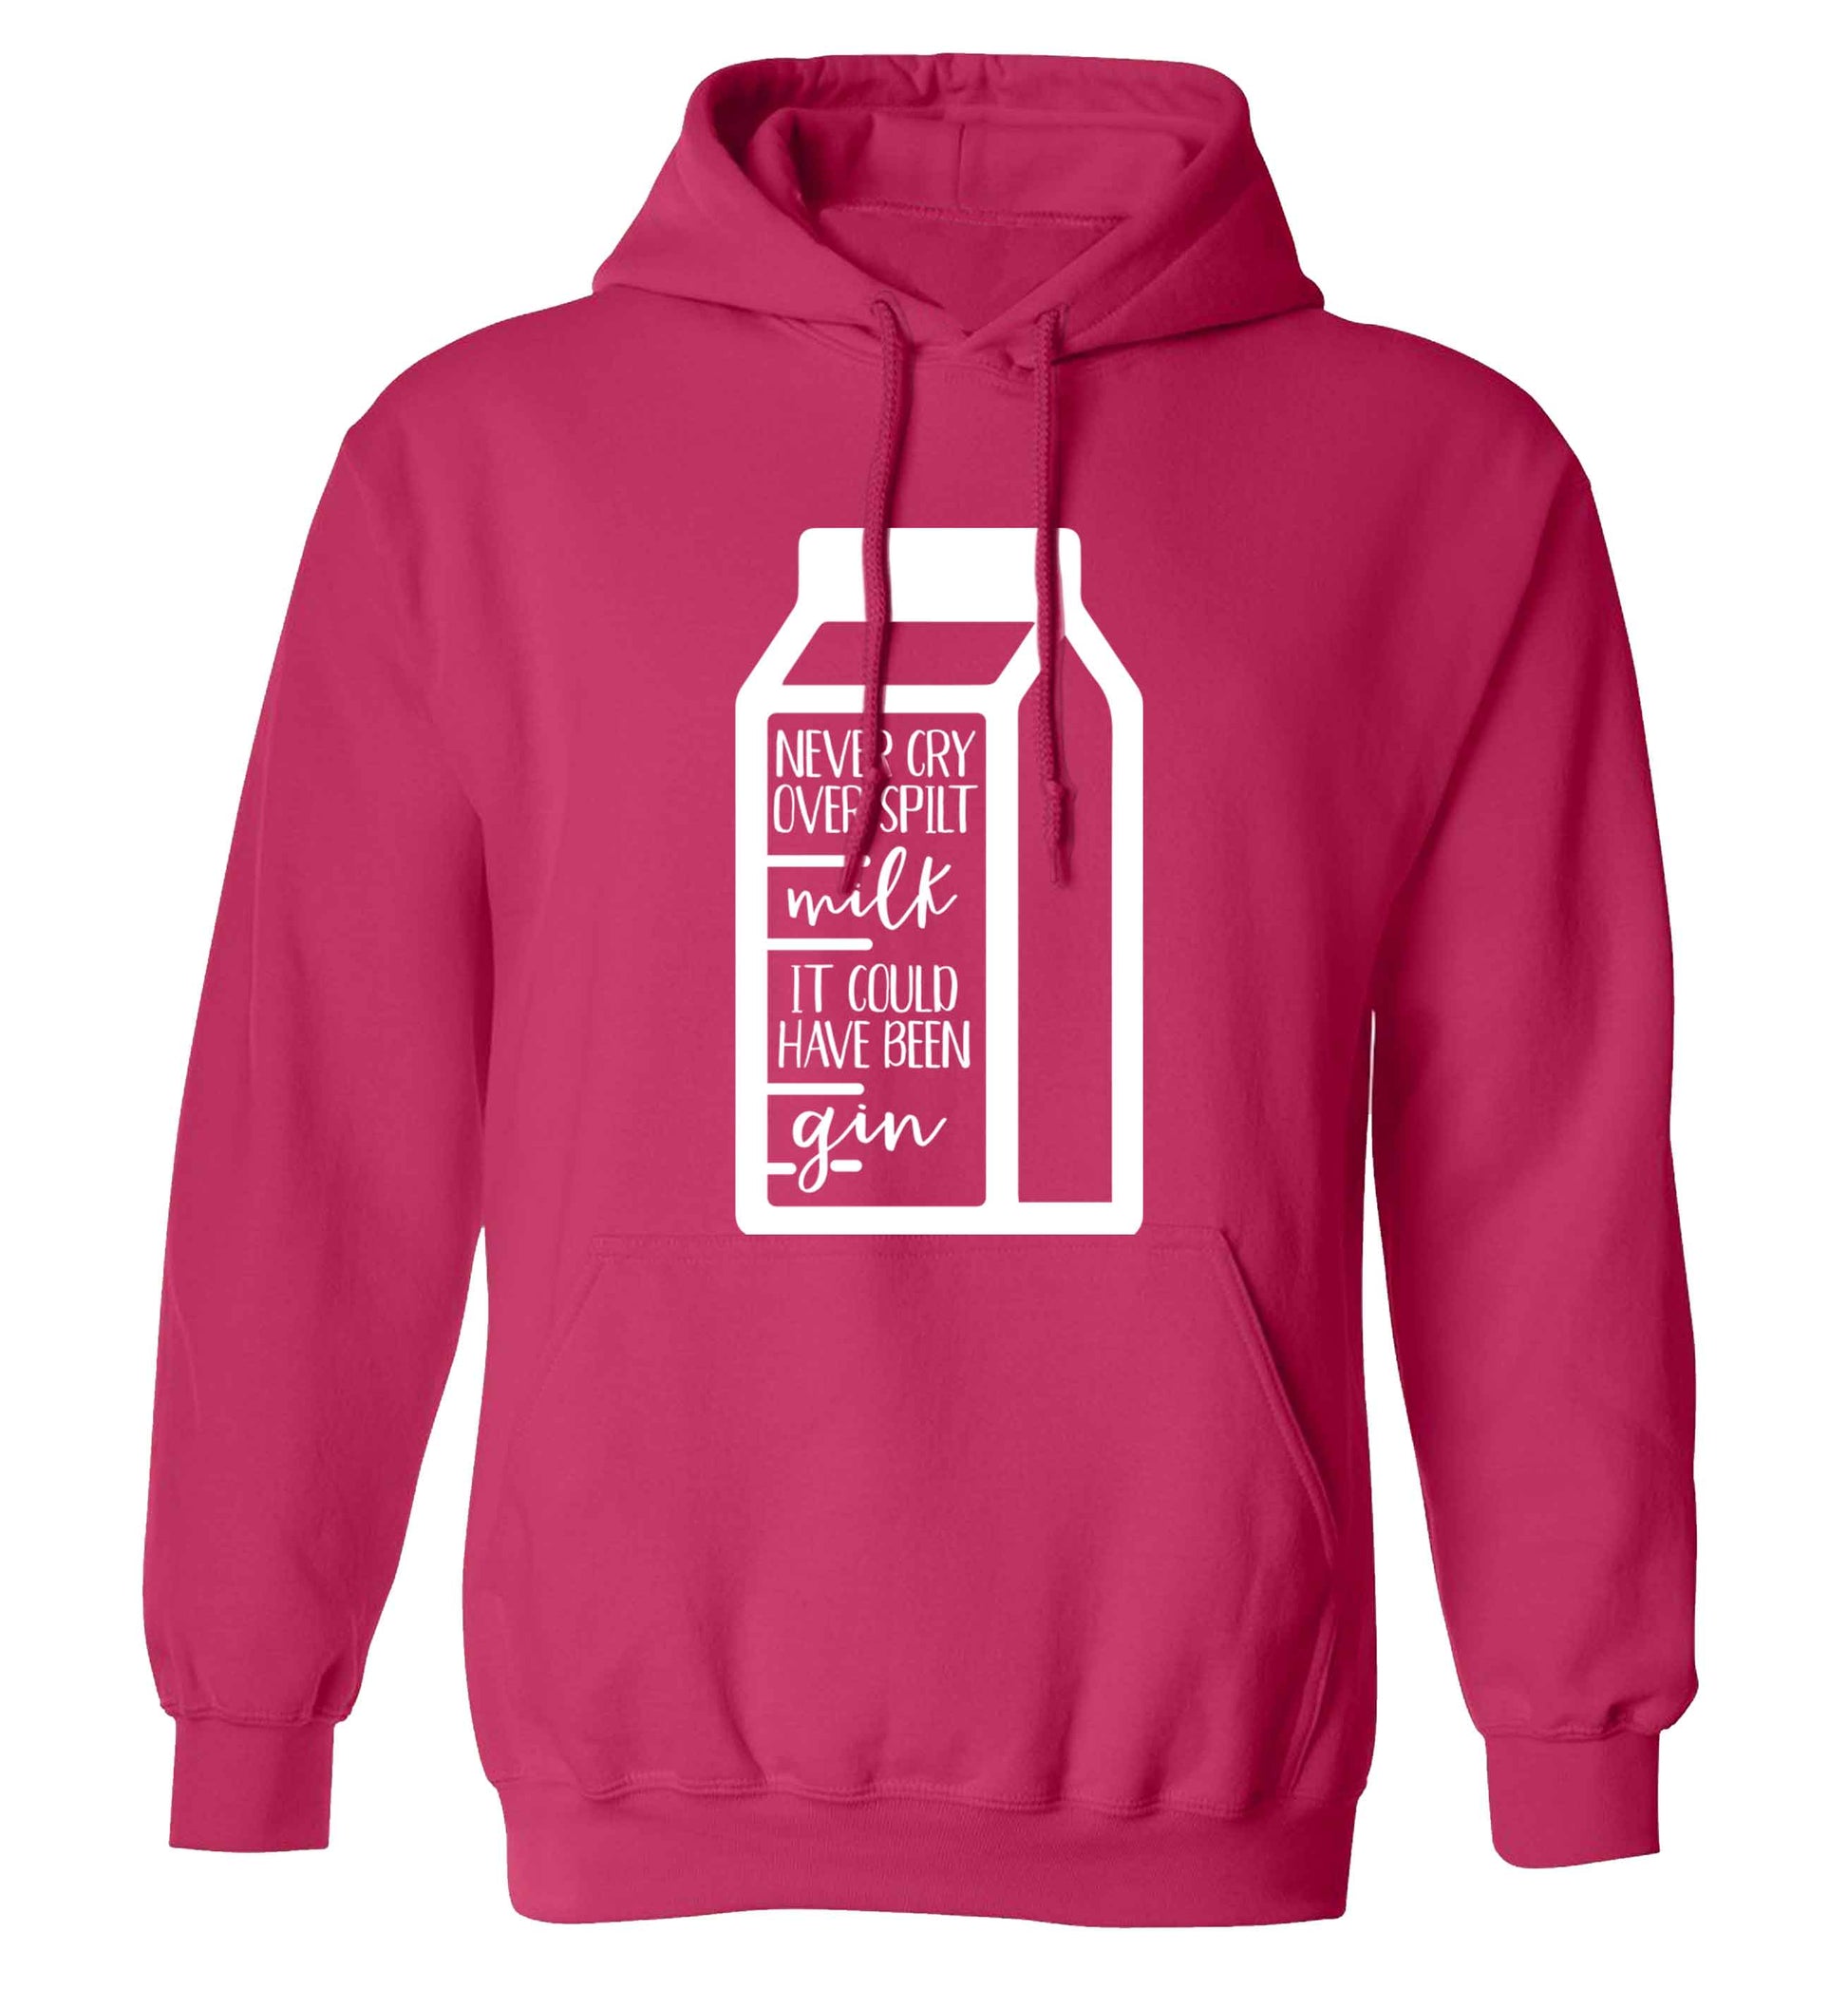 Never cry over spilt milk, it could have been gin adults unisex pink hoodie 2XL